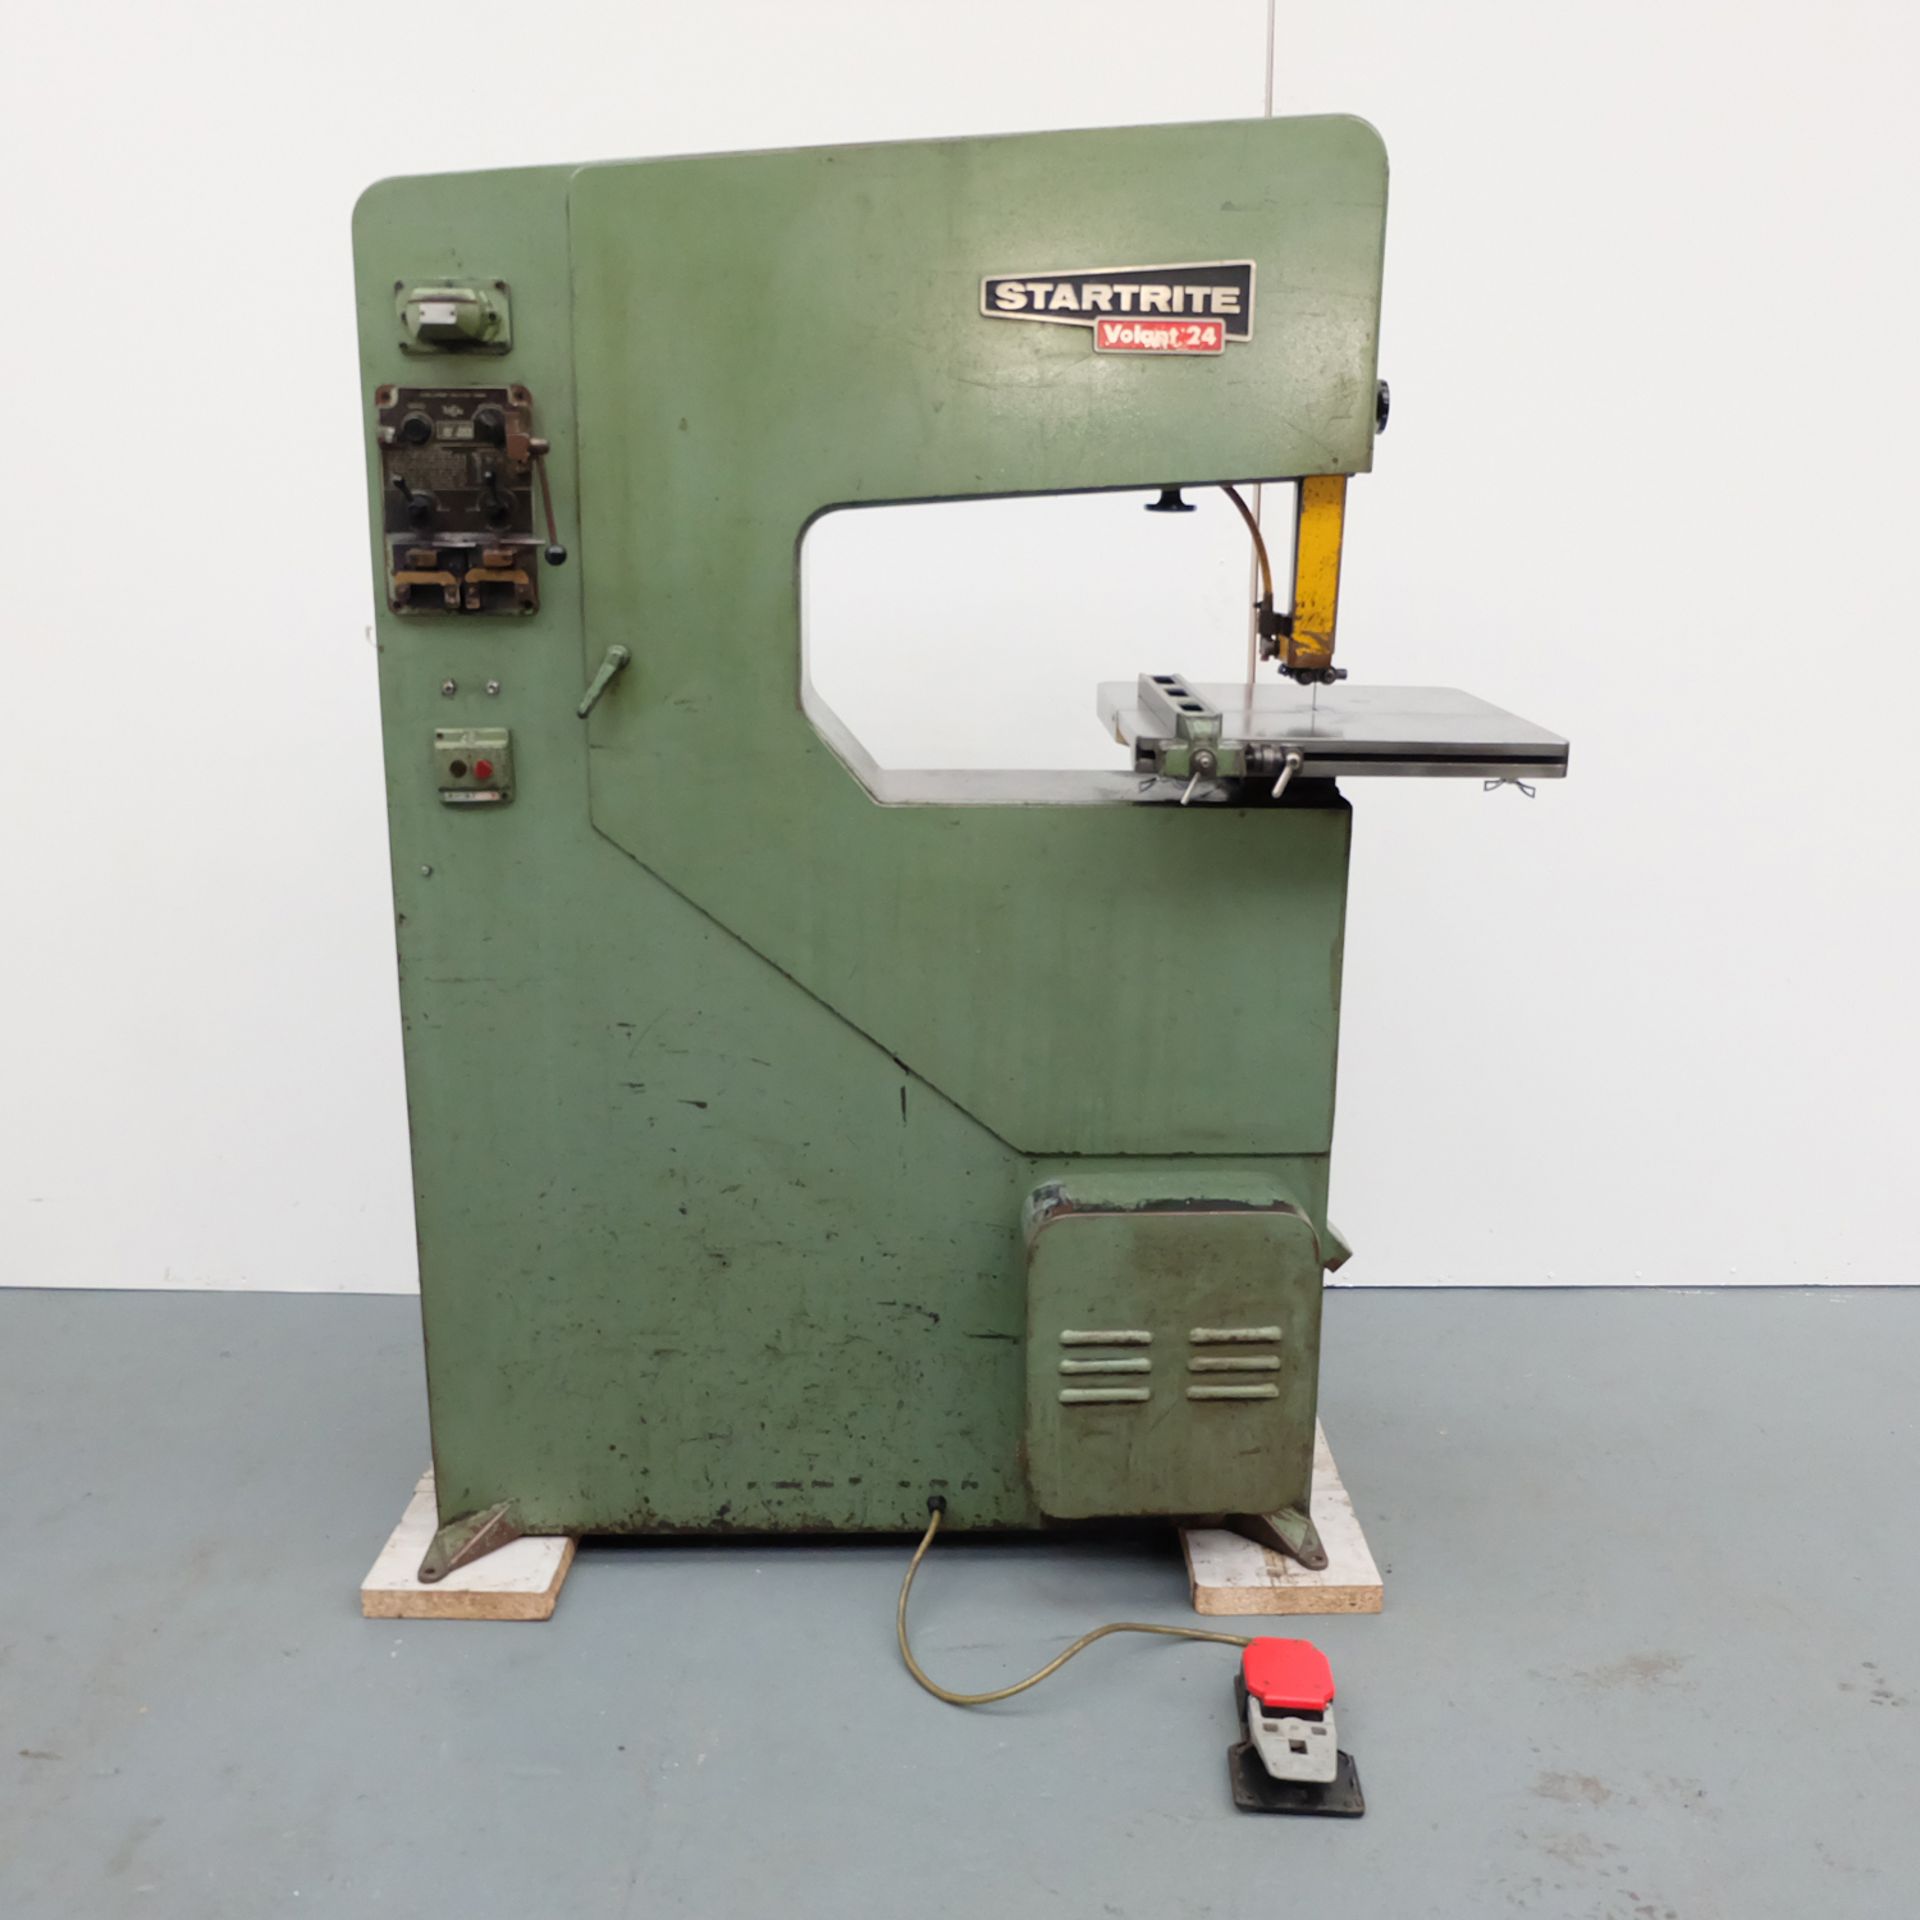 Startrite Volant 24 Type 24-V-10. Vertical Bandsaw. Table Size 19" x 19". Throat 24".